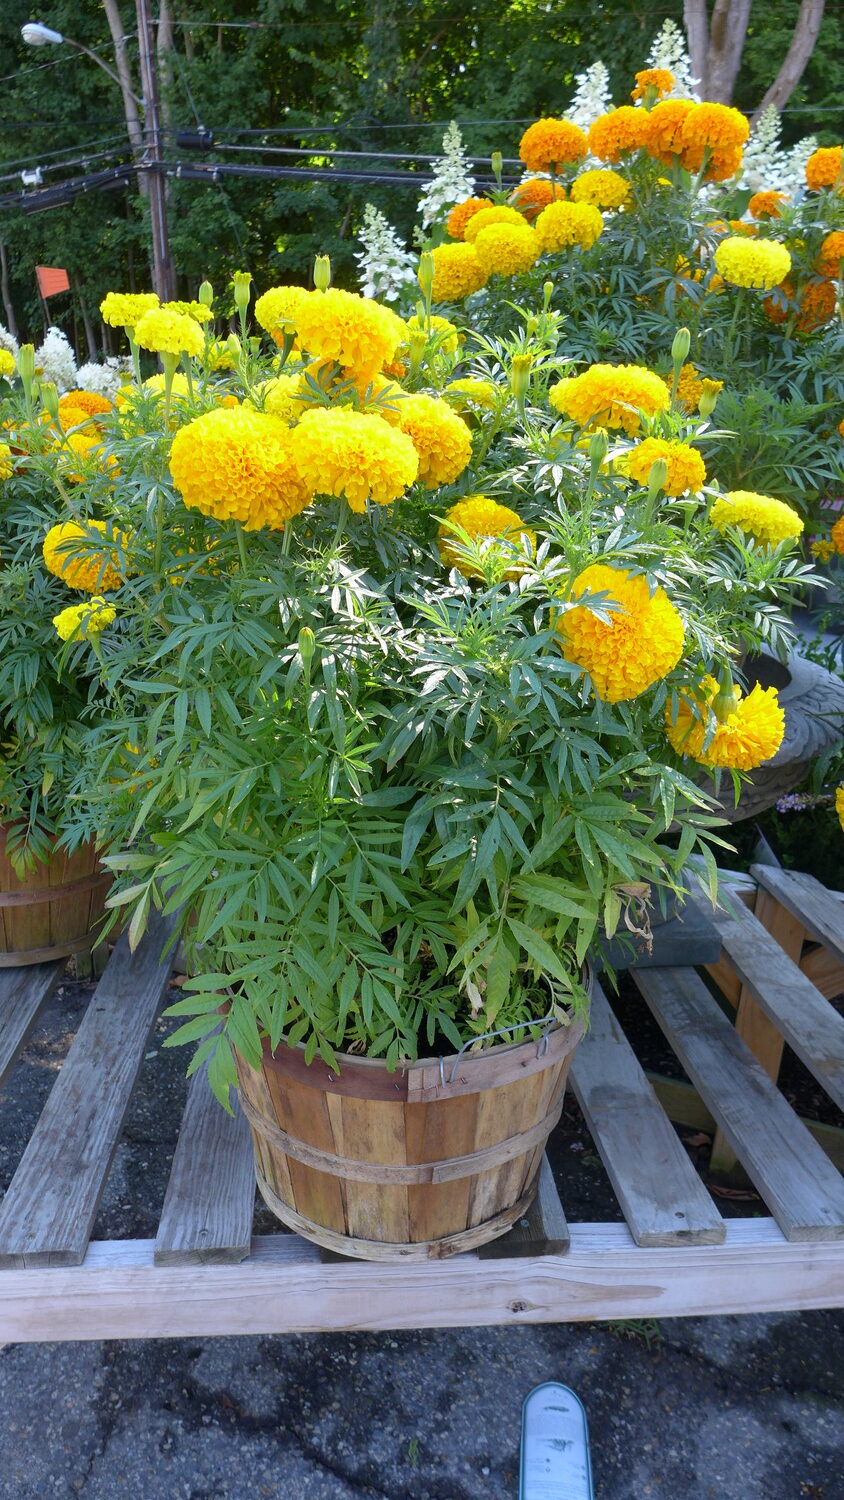 As we get later into the gardening season you can find marigolds at garden centers in larger containers. Great for instant gardens, a Hamptons necessity for party season. Great for filling in large spaces and containers. This American-type marigold is about 15 to 18 inches tall, was photographed in June and is in a half-bushel basket. ANDREW MESSINGER